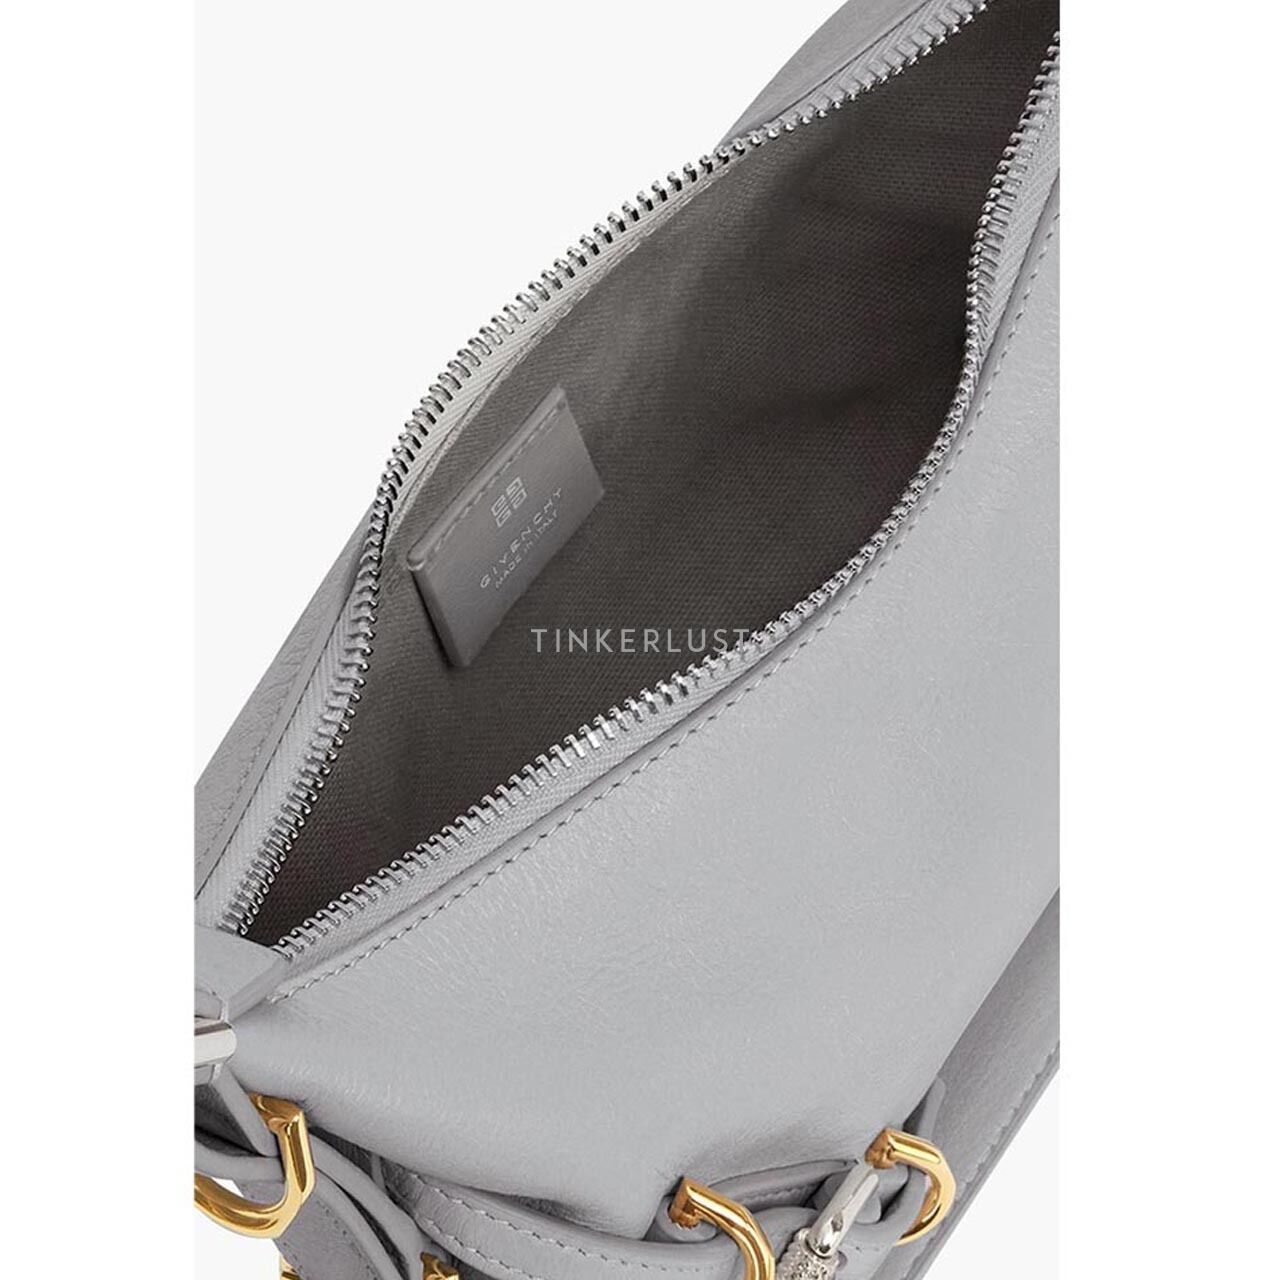 Givenchy Mini Voyou Crossbody Bag in Light Grey Tumbled Calfskin Leather